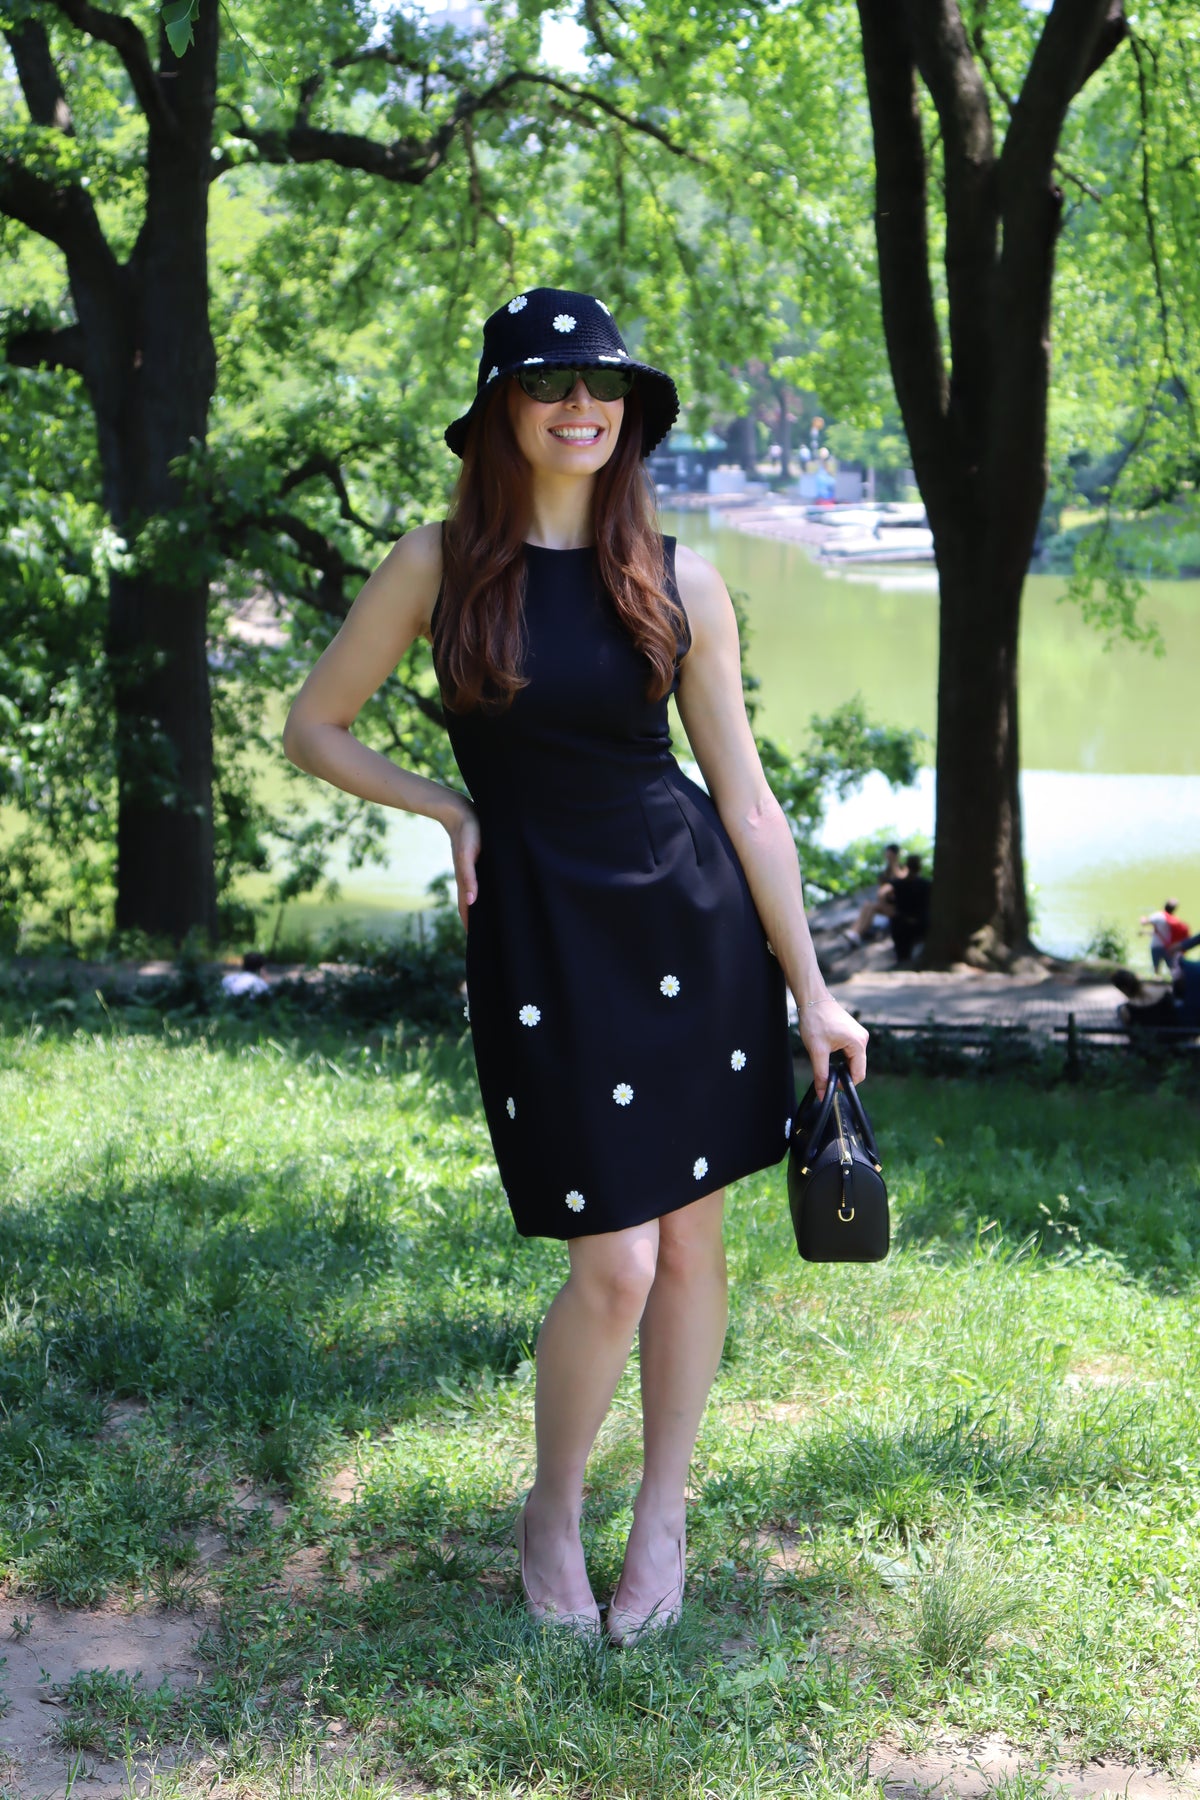 Model in a black dress with white daisy appliques standing in front of  trees and a lake.